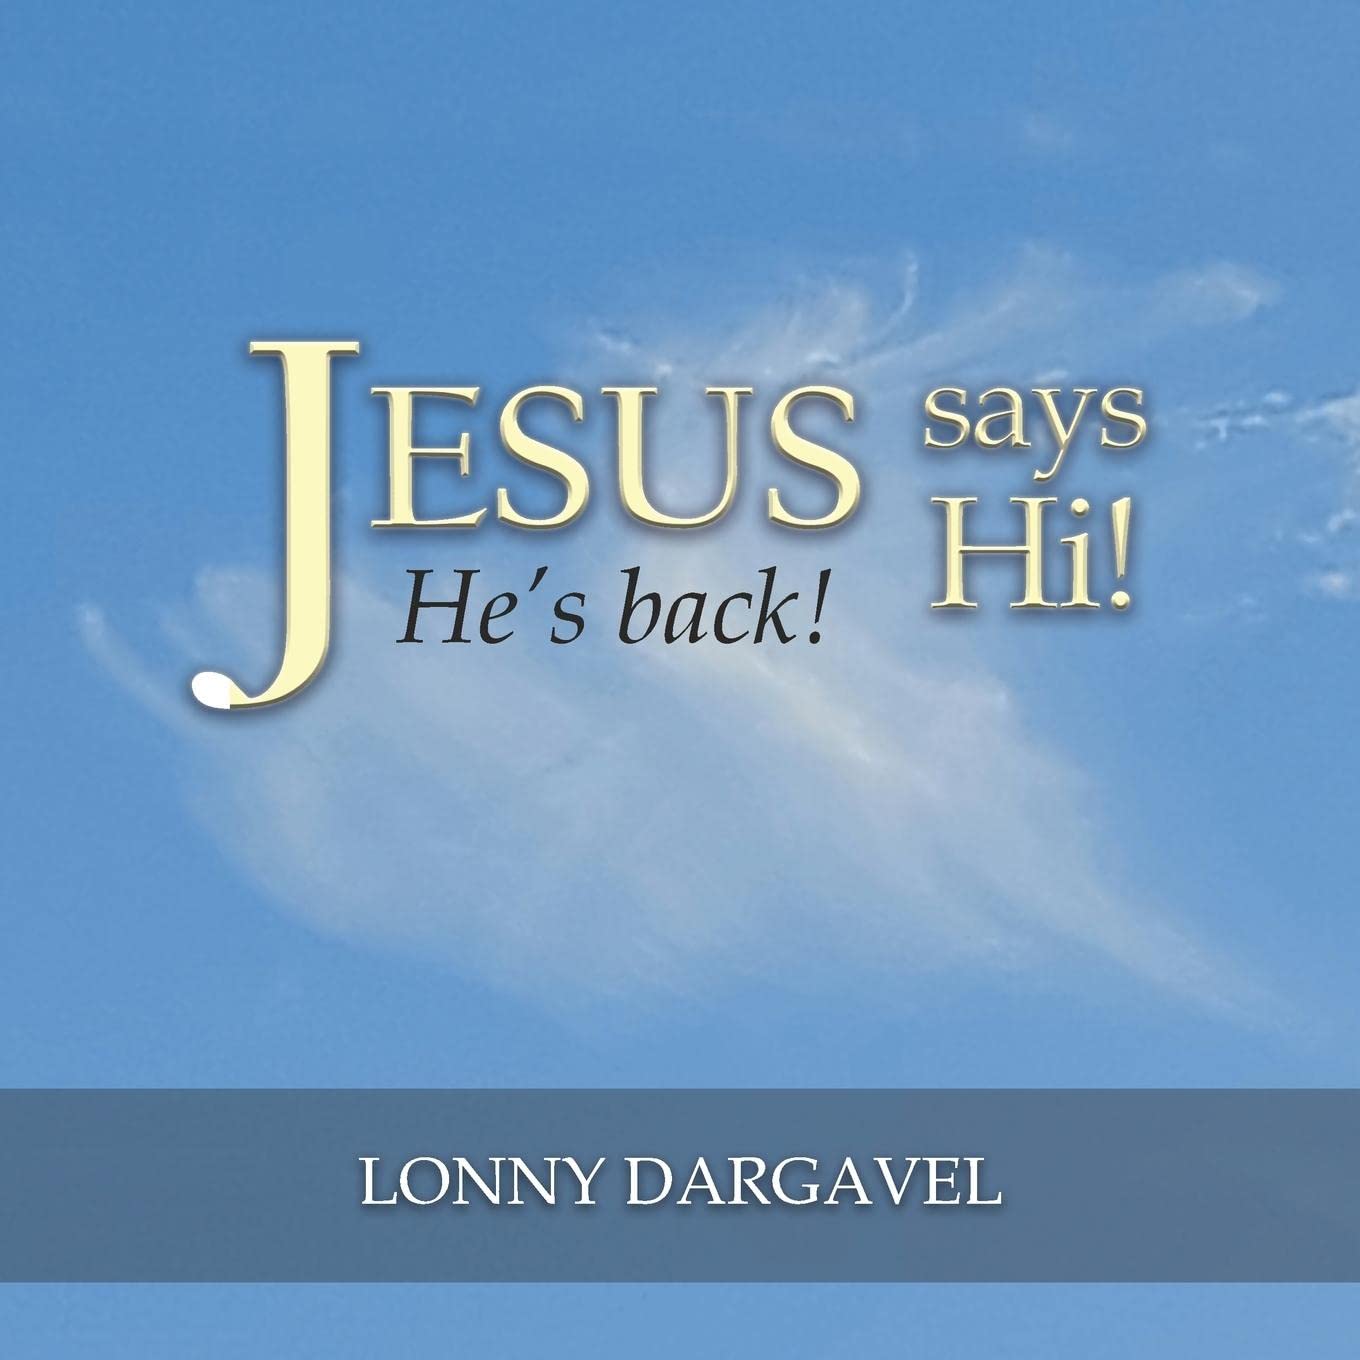 Author's Tranquility Press presents "Jesus Says Hi! He's Back!" - a Spiritual Journey with Unprecedented Encounters by Lonny Dargavel